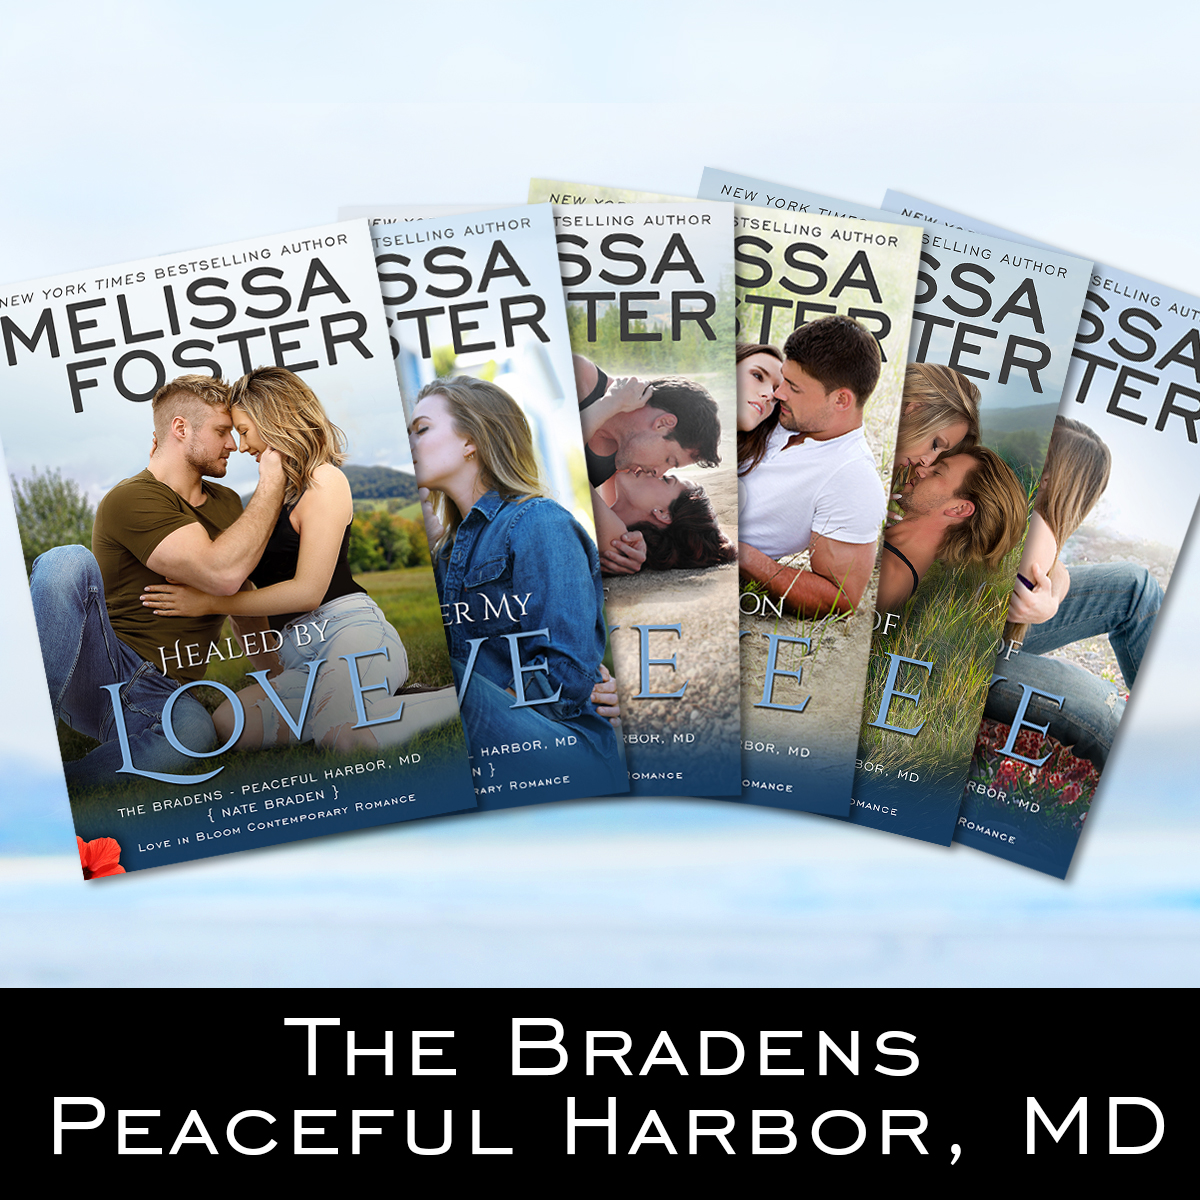 The Bradens at Peaceful Harbor series by Melissa Foster